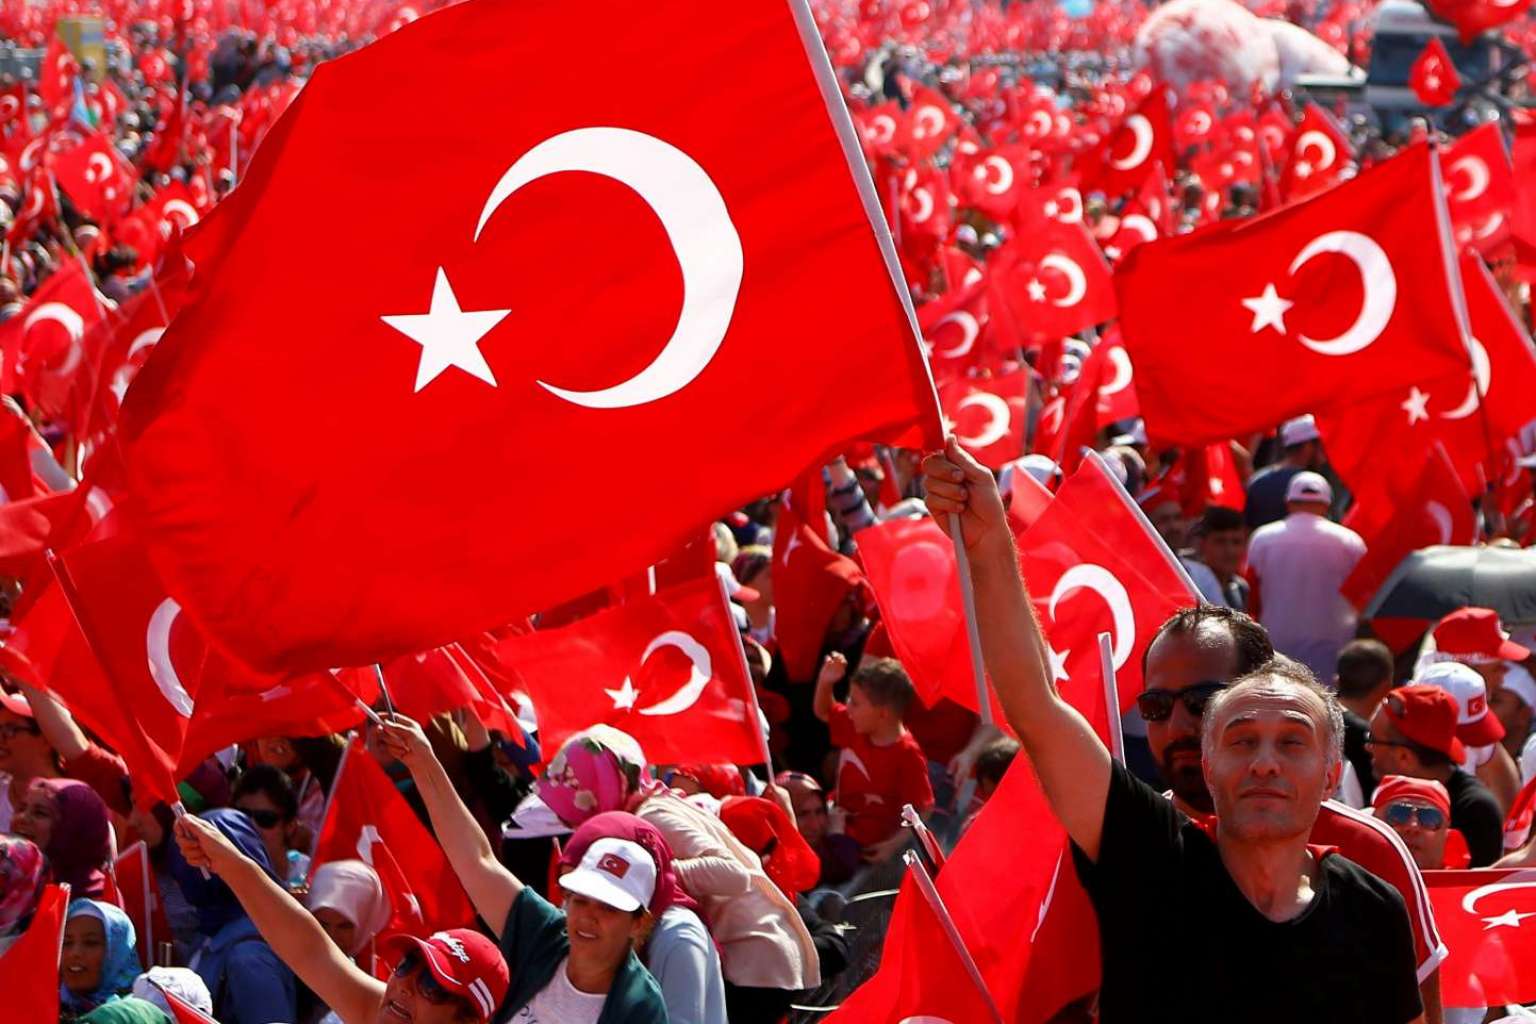 Turkey's Erdogan stages mass rally in show of strength after coup attempt